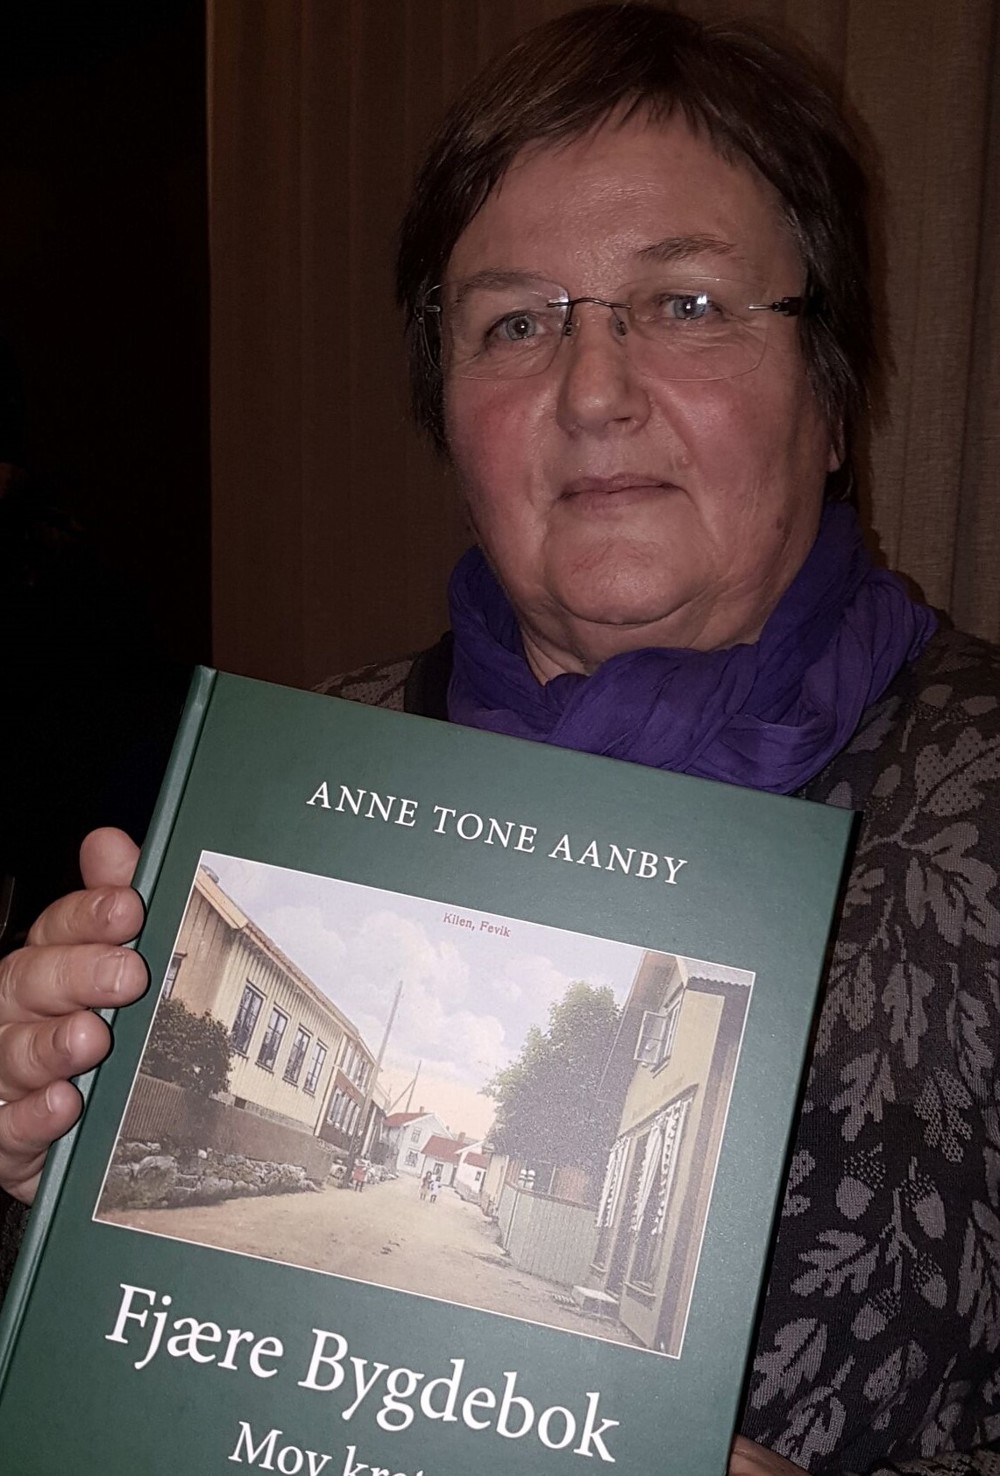 Anne Tone Aanby style=